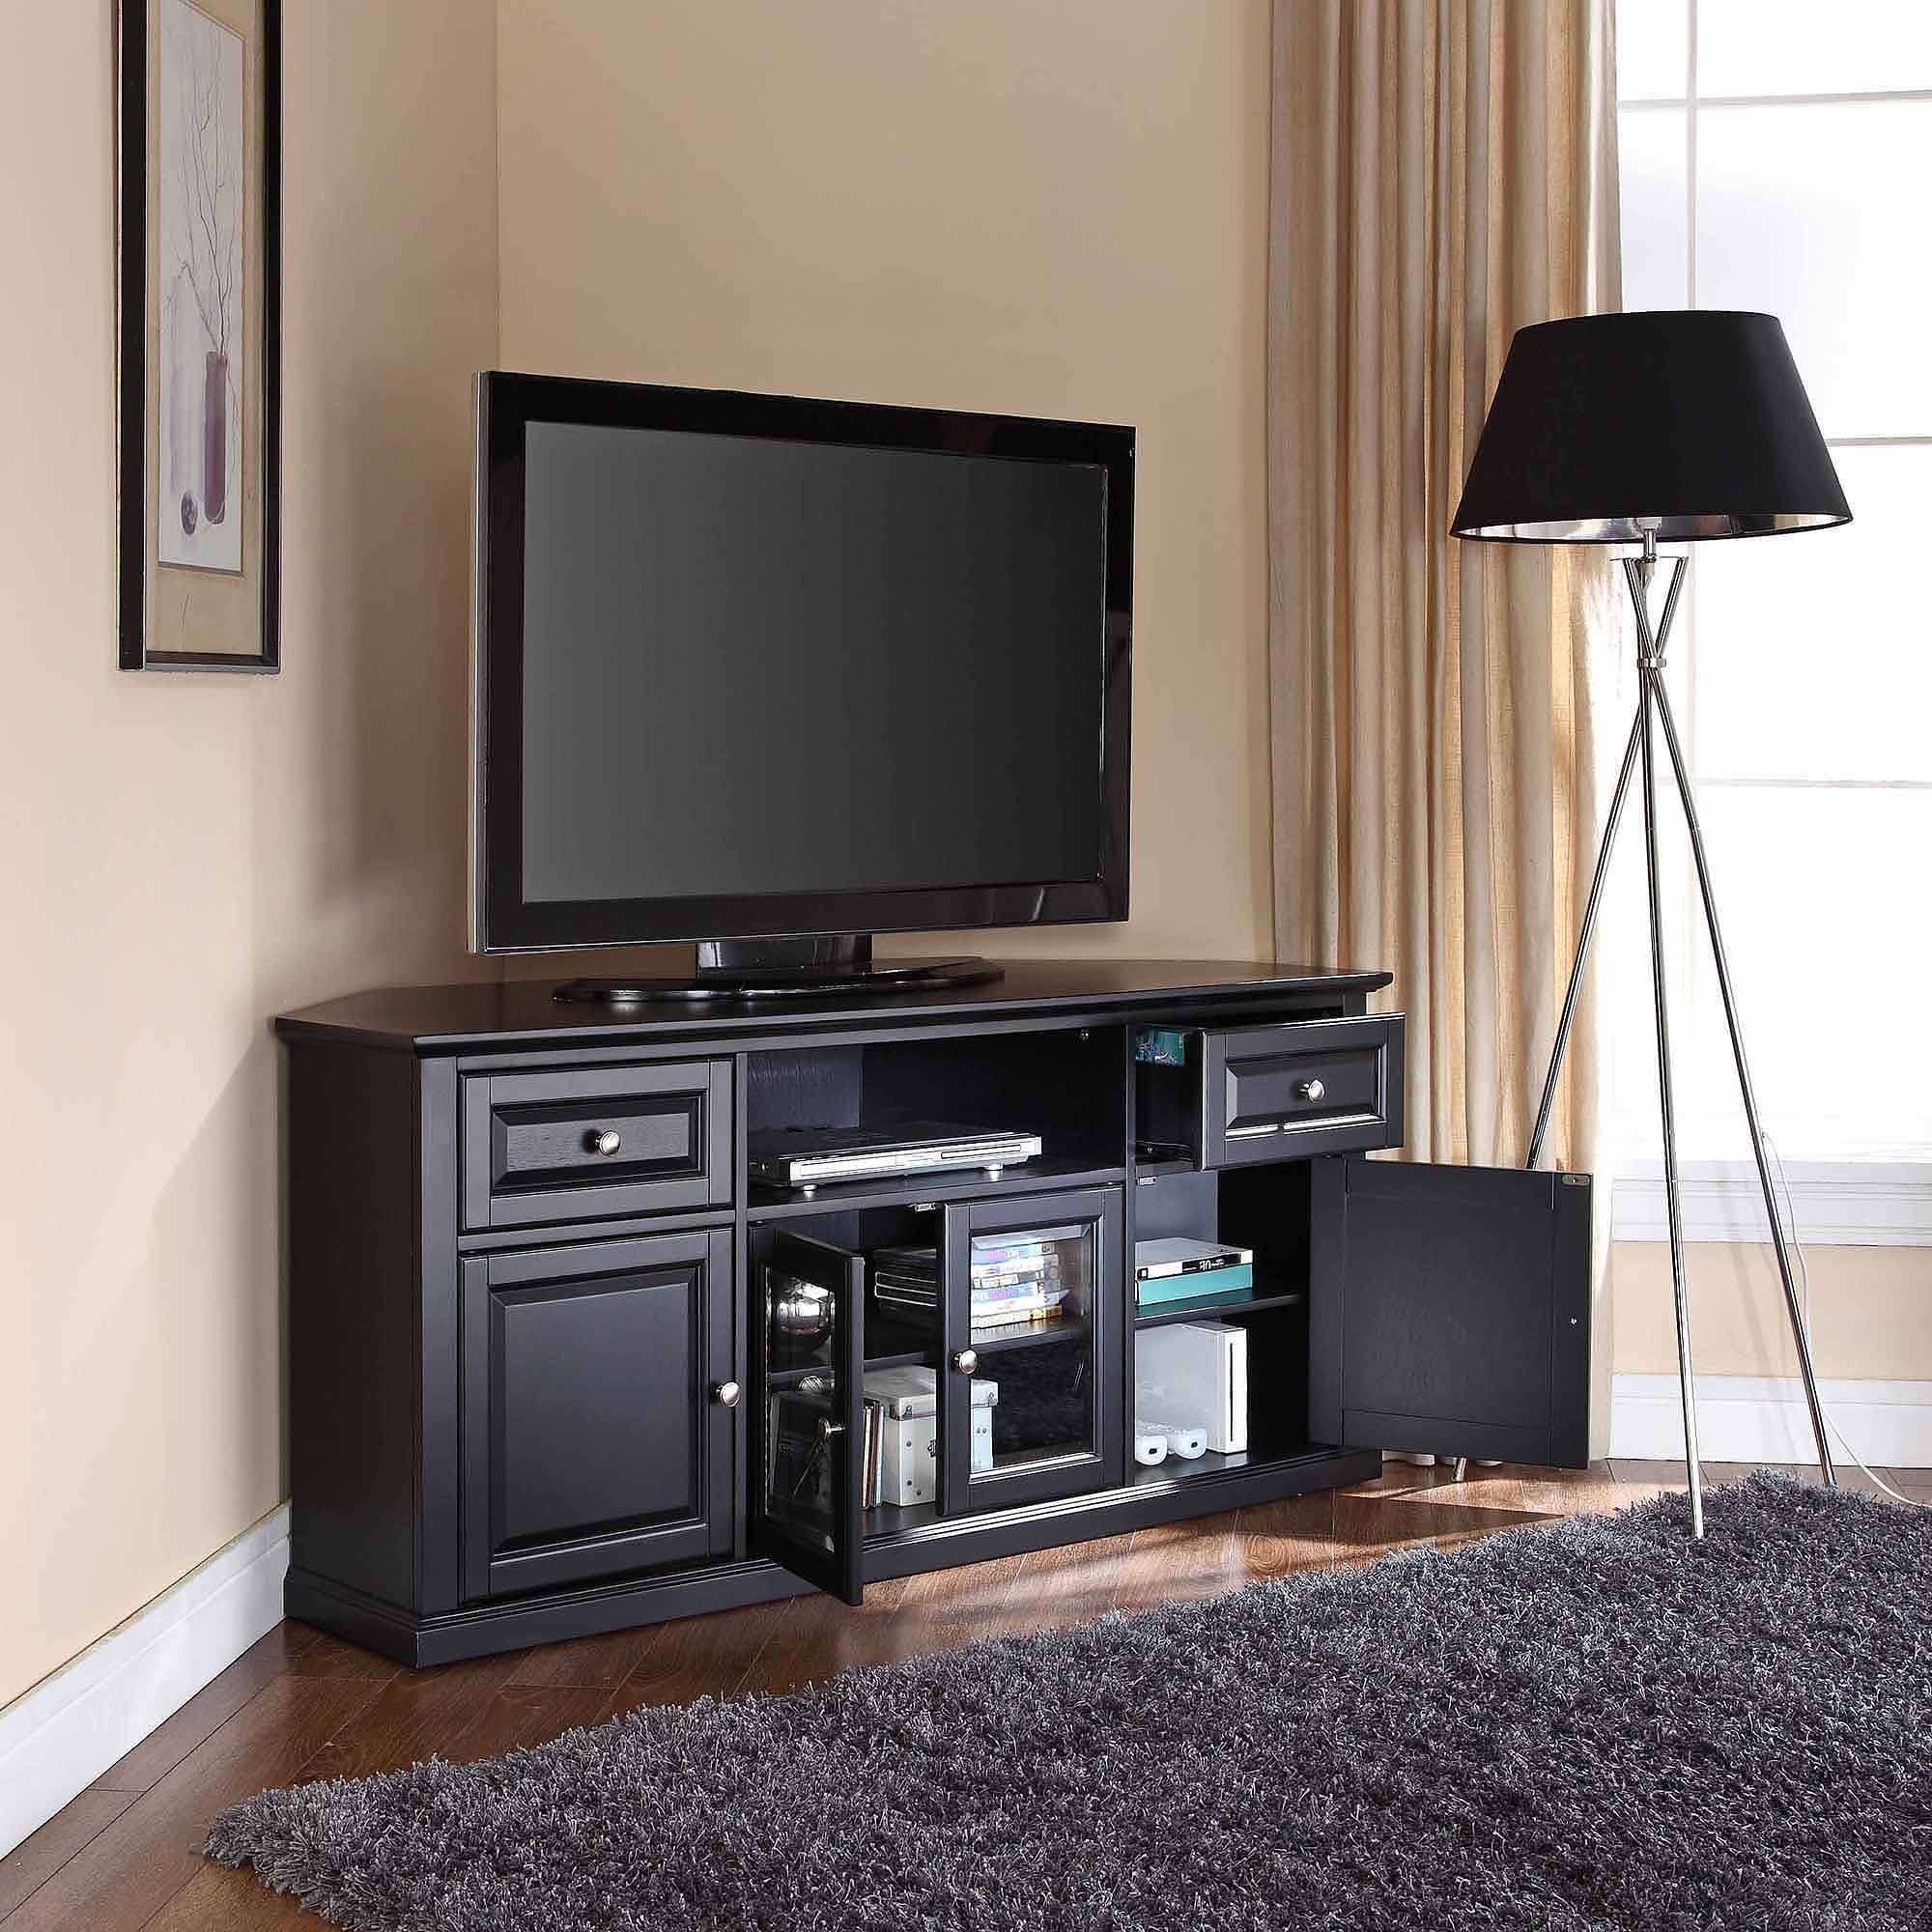 Crosley Furniture Corner Tv Stand For Tvs Up To 60" – Walmart For Cornet Tv Stands (View 1 of 15)